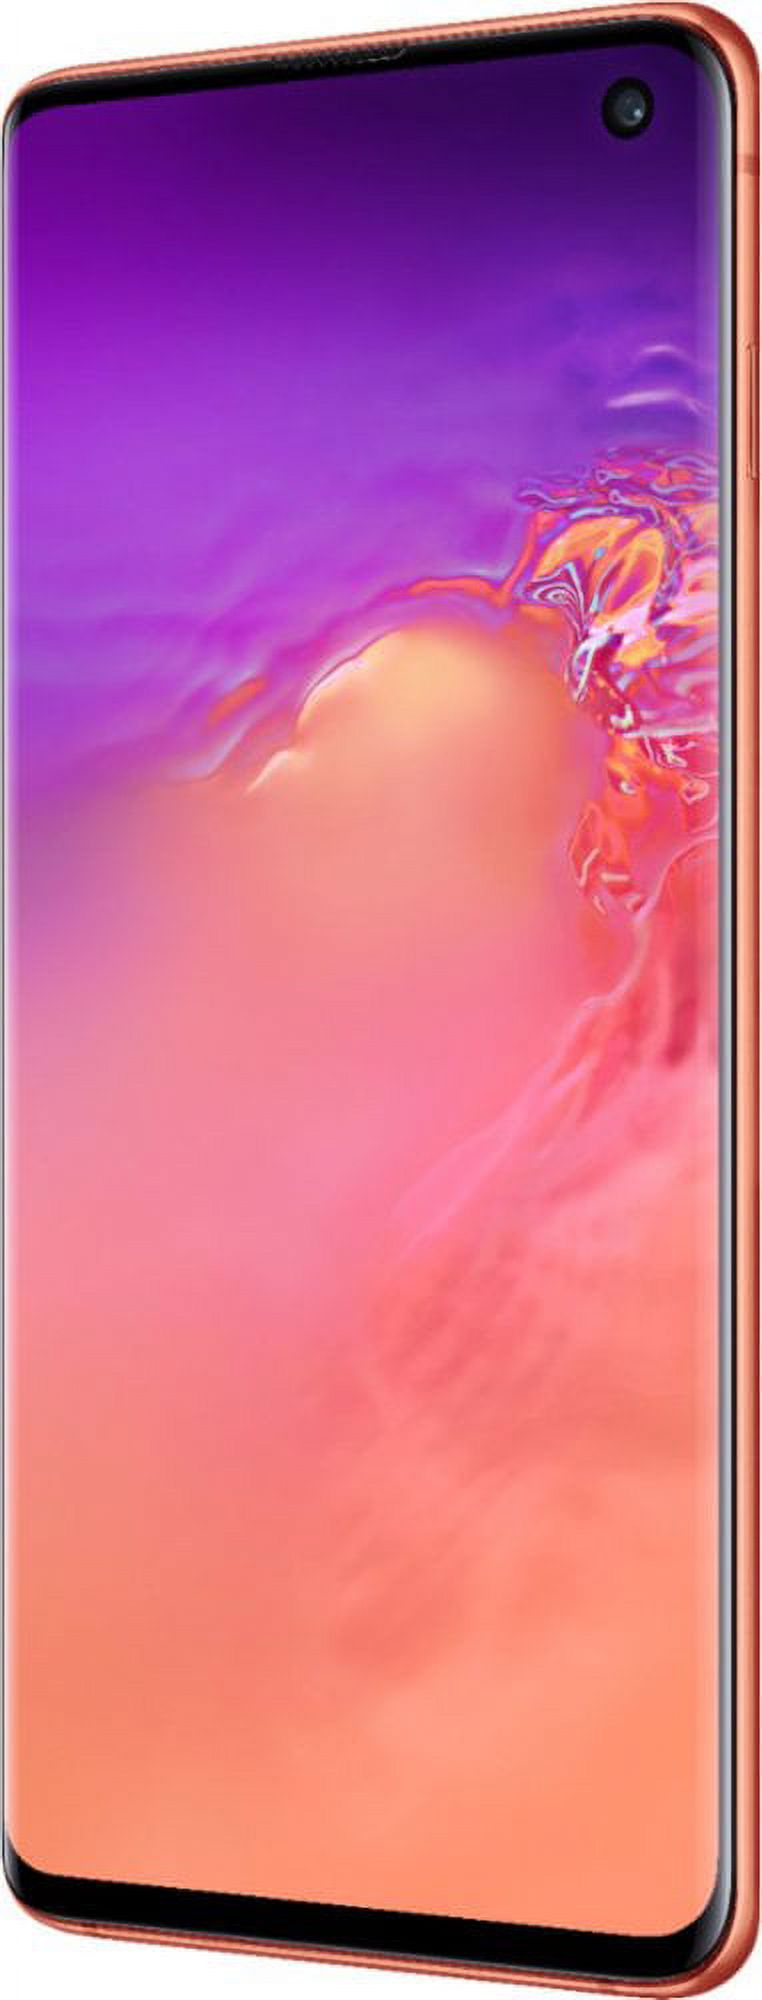 Pre-Owned Samsung GALAXY S10 SM-G973U1 128GB Pink (US Model) - Factory Unlocked Cell Phone (Refurbished: Like New) - image 5 of 6